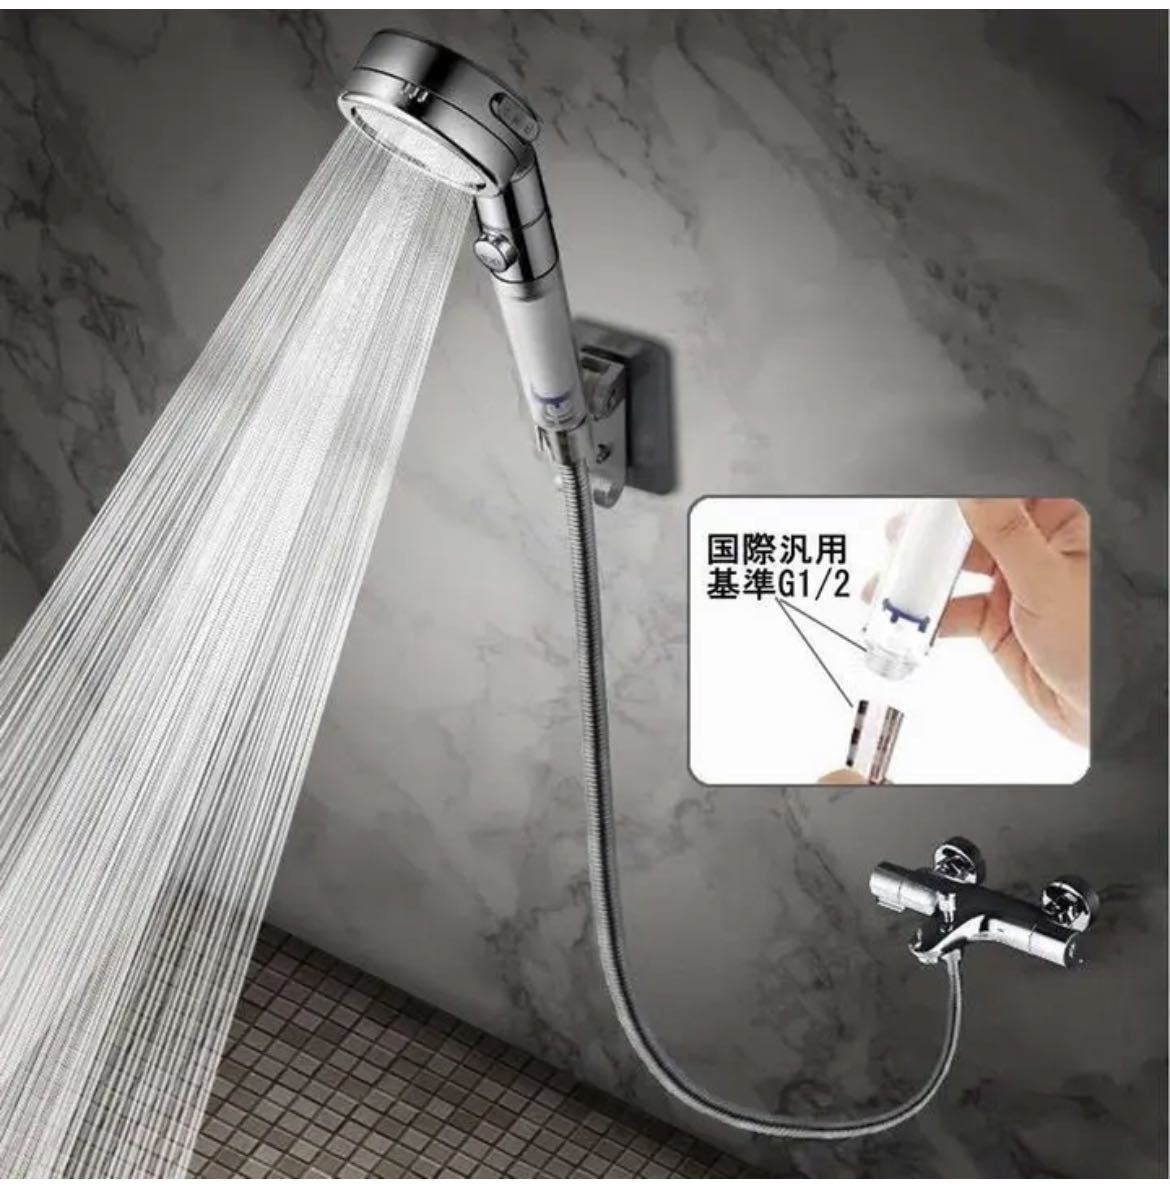  new goods shower hose flexible stainless steel bus room water 